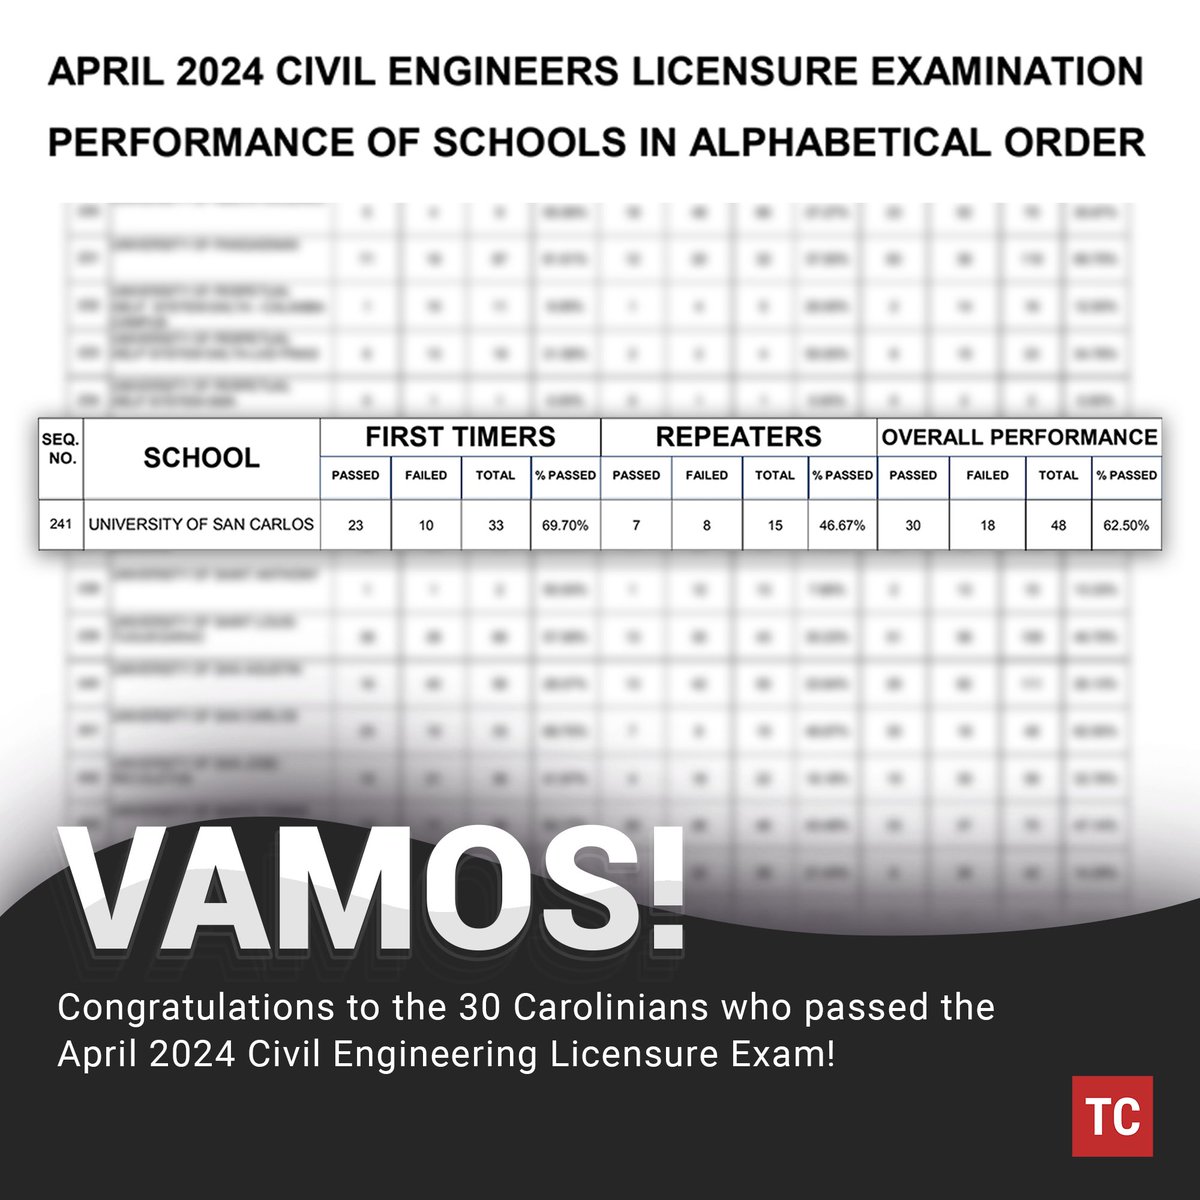 VAMOS: Congratulations to the 30 Carolinians who passed the April 2024 Civil Engineers Licensure Examination (CELE) held last April 20 to 21. USC earned a passing rate of 62.50% in its overall performance compared to the national passing rate of 39.27%.